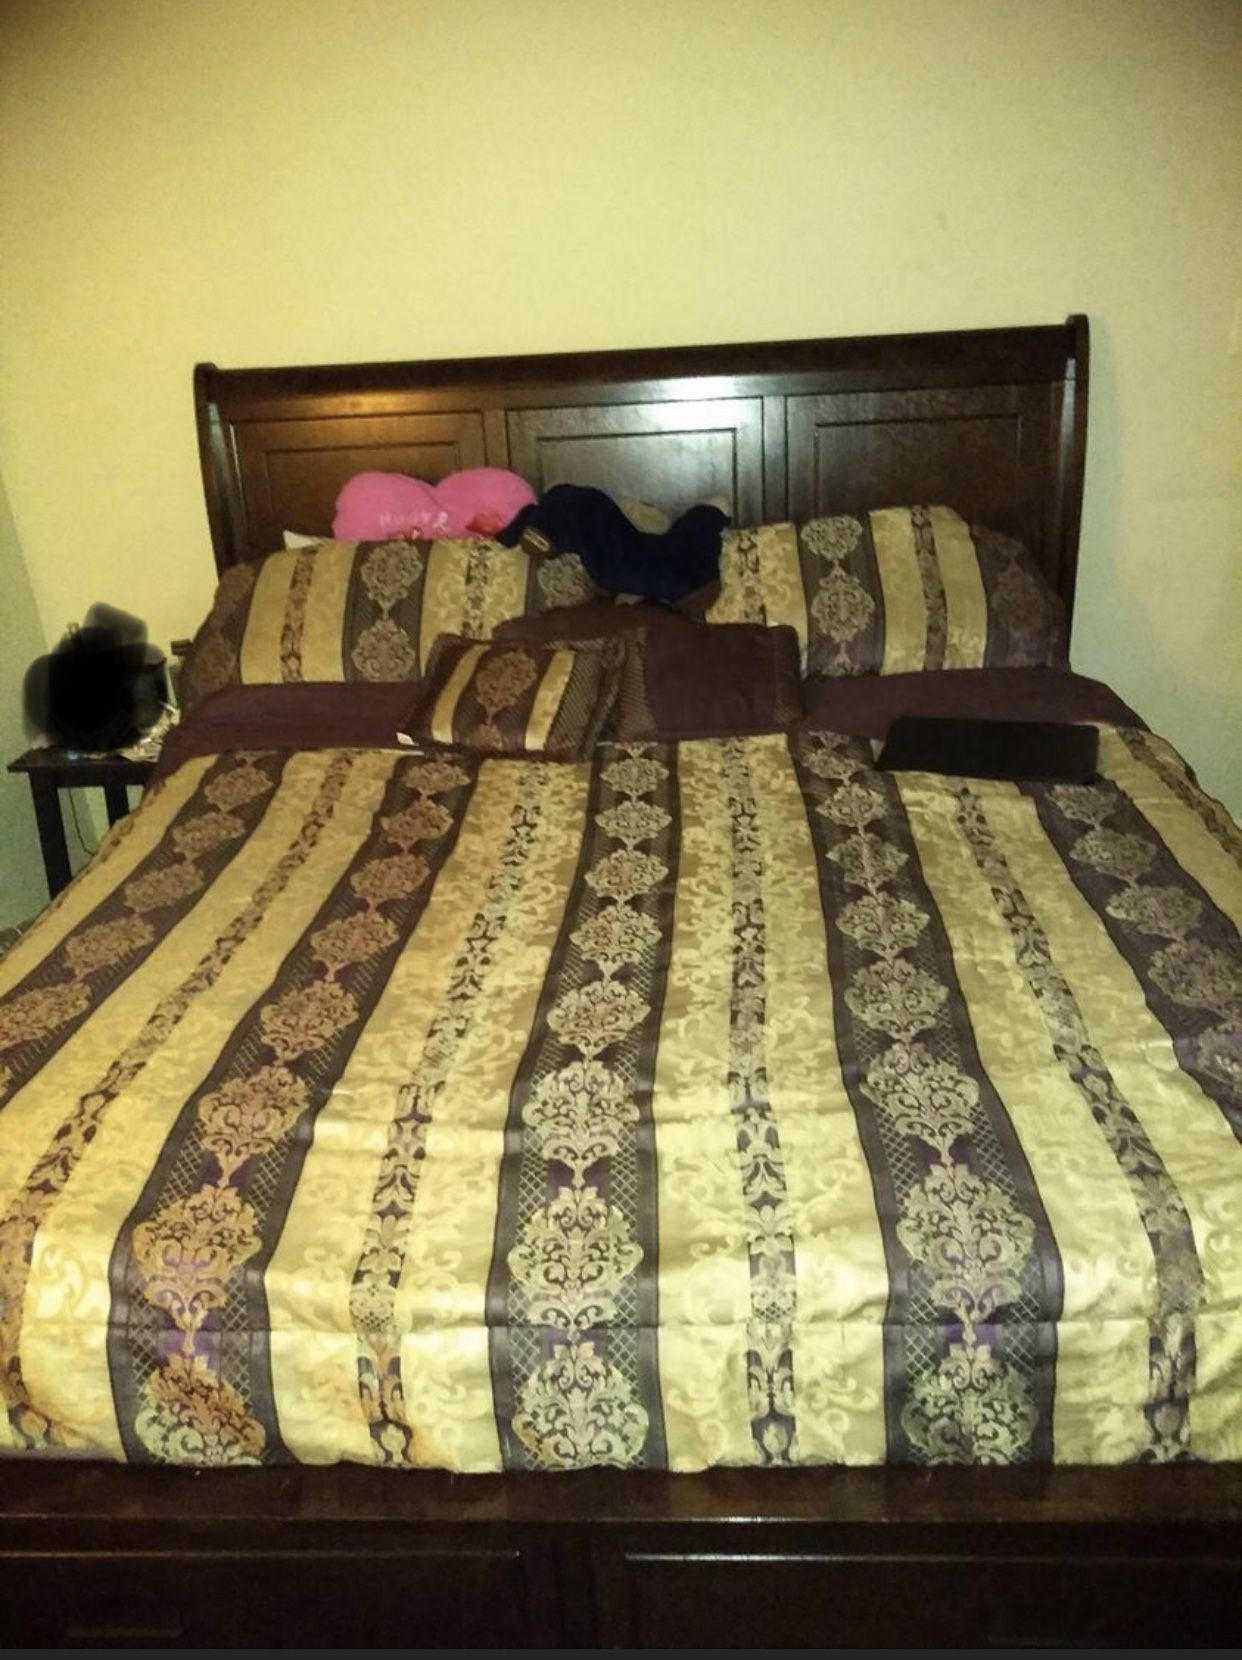 Bed frame must go has normal wear and tare needs slacks for mattress but overall in good condition paid a little over $2000 for it brand new looking